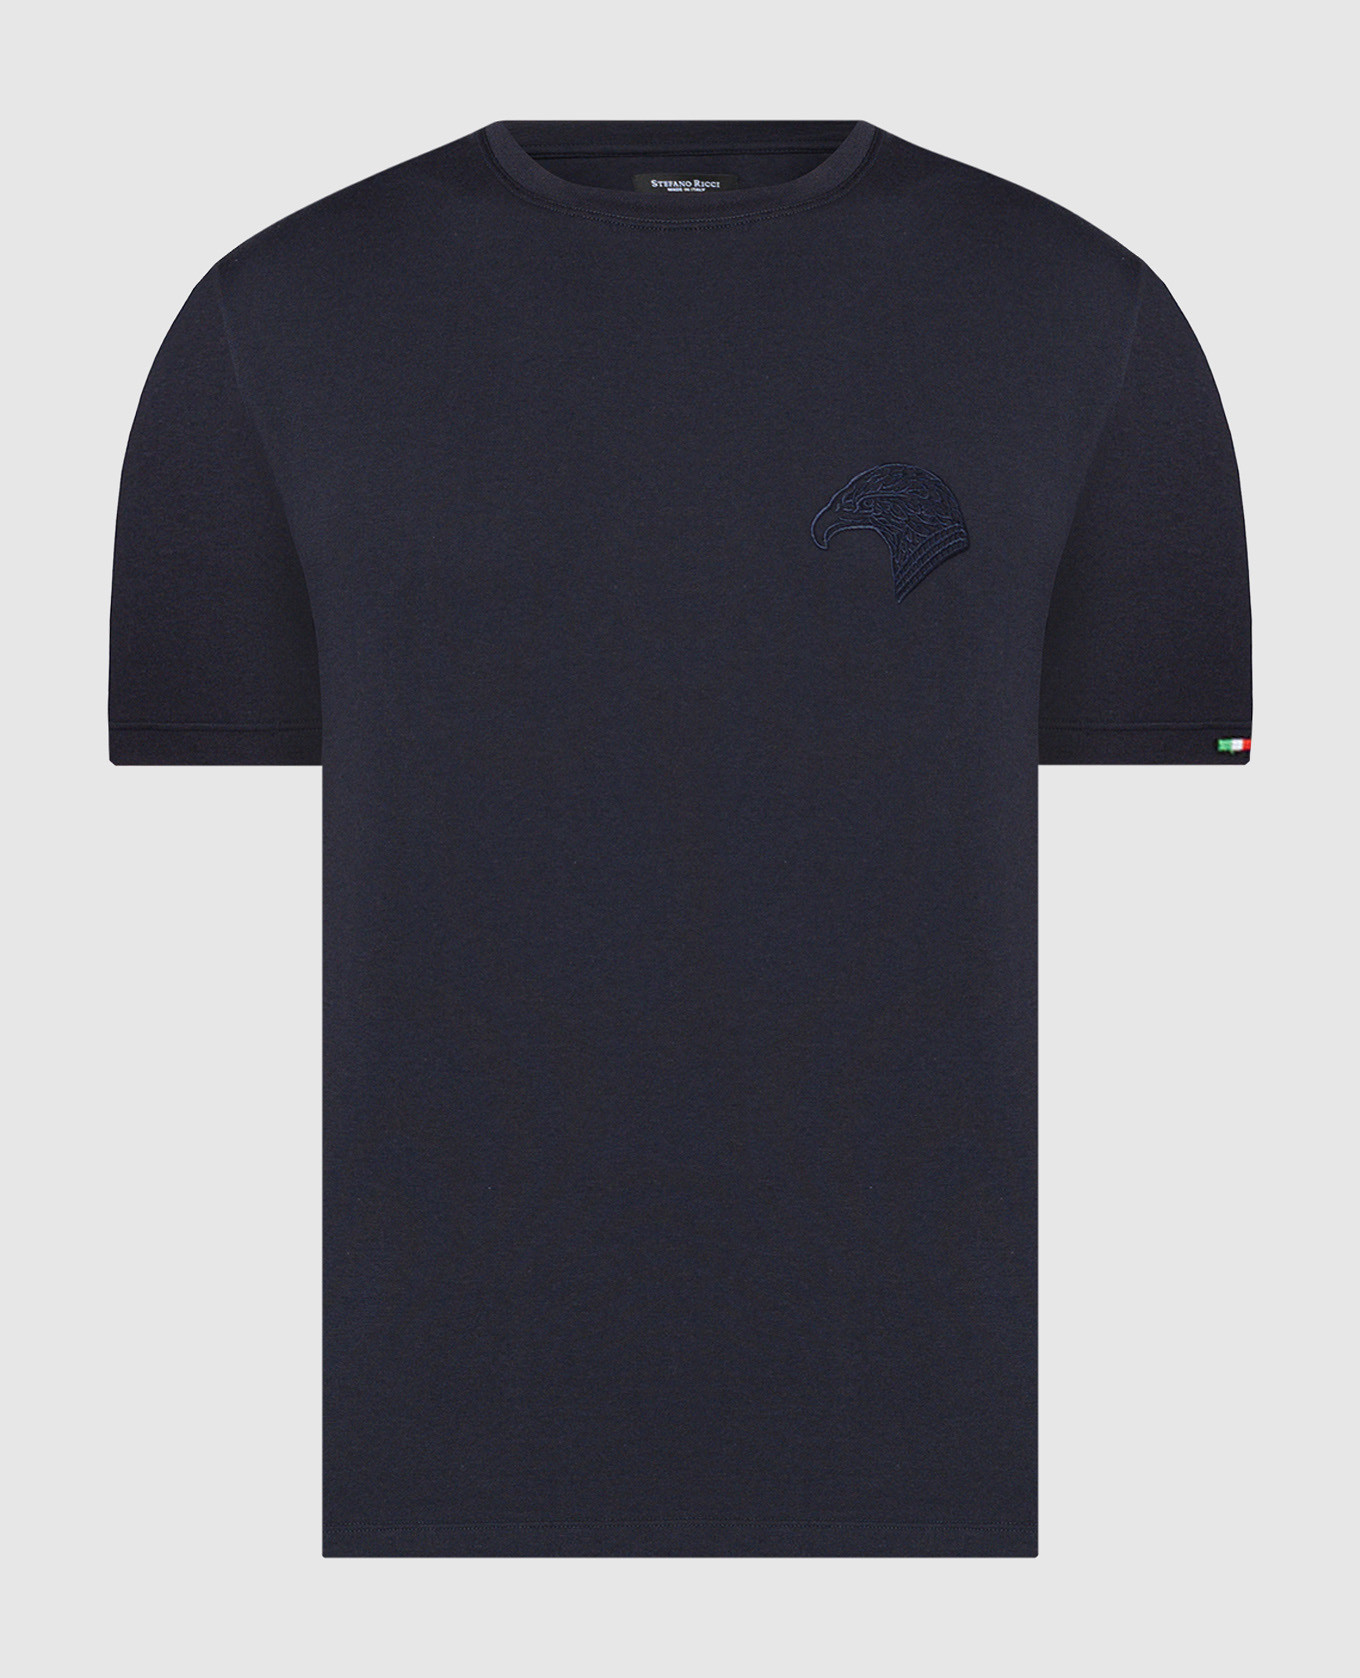 Blue t-shirt with embroidered logo emblem in the form of an eagle head